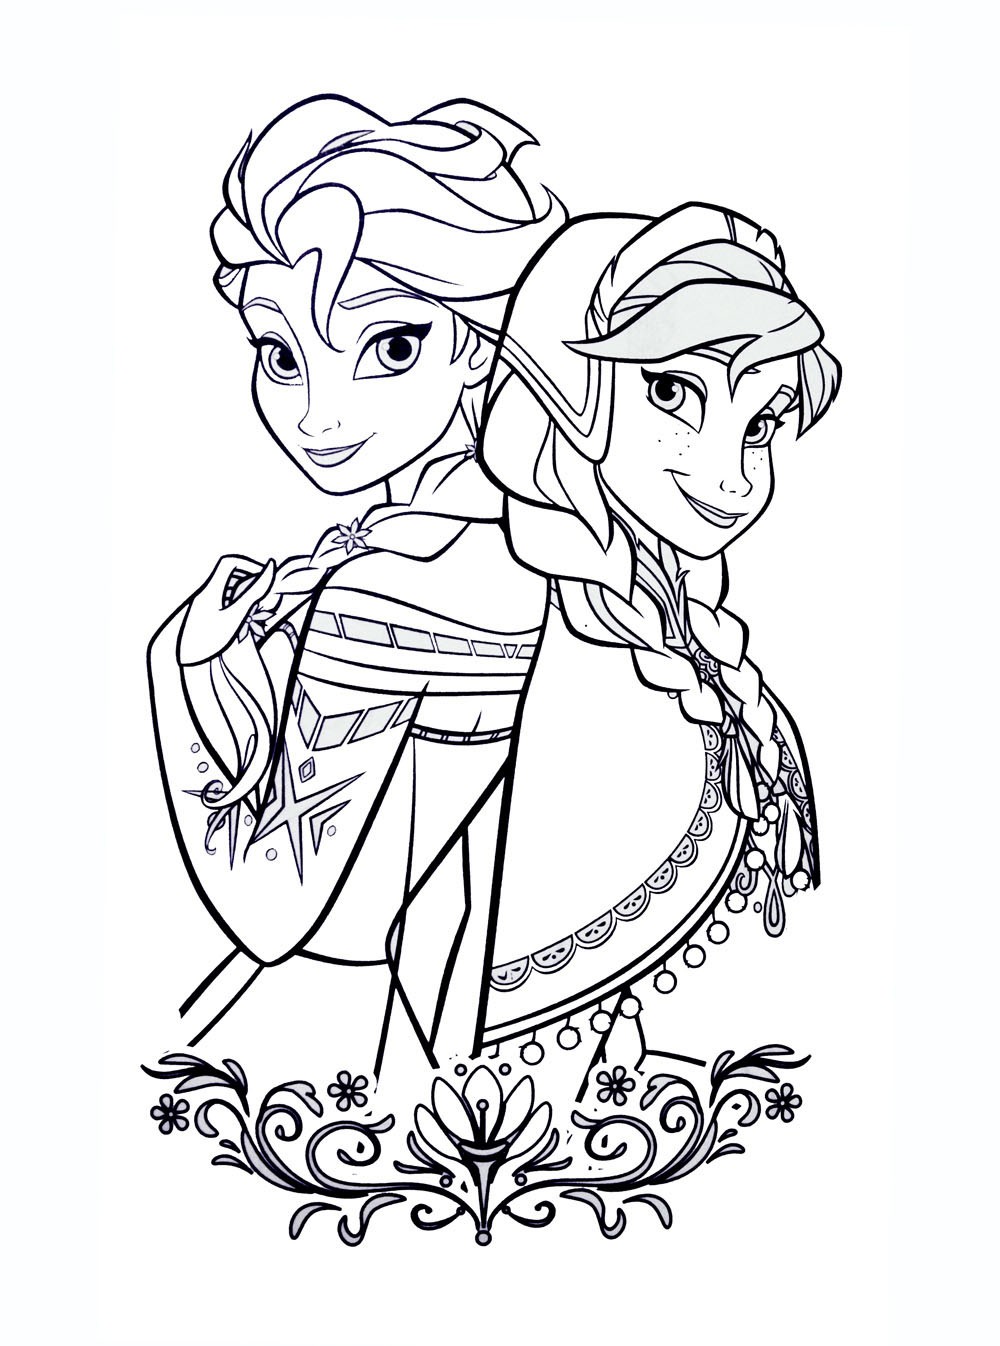 Frozen Coloring Pages For Kids
 Frozen free to color for kids Frozen Kids Coloring Pages